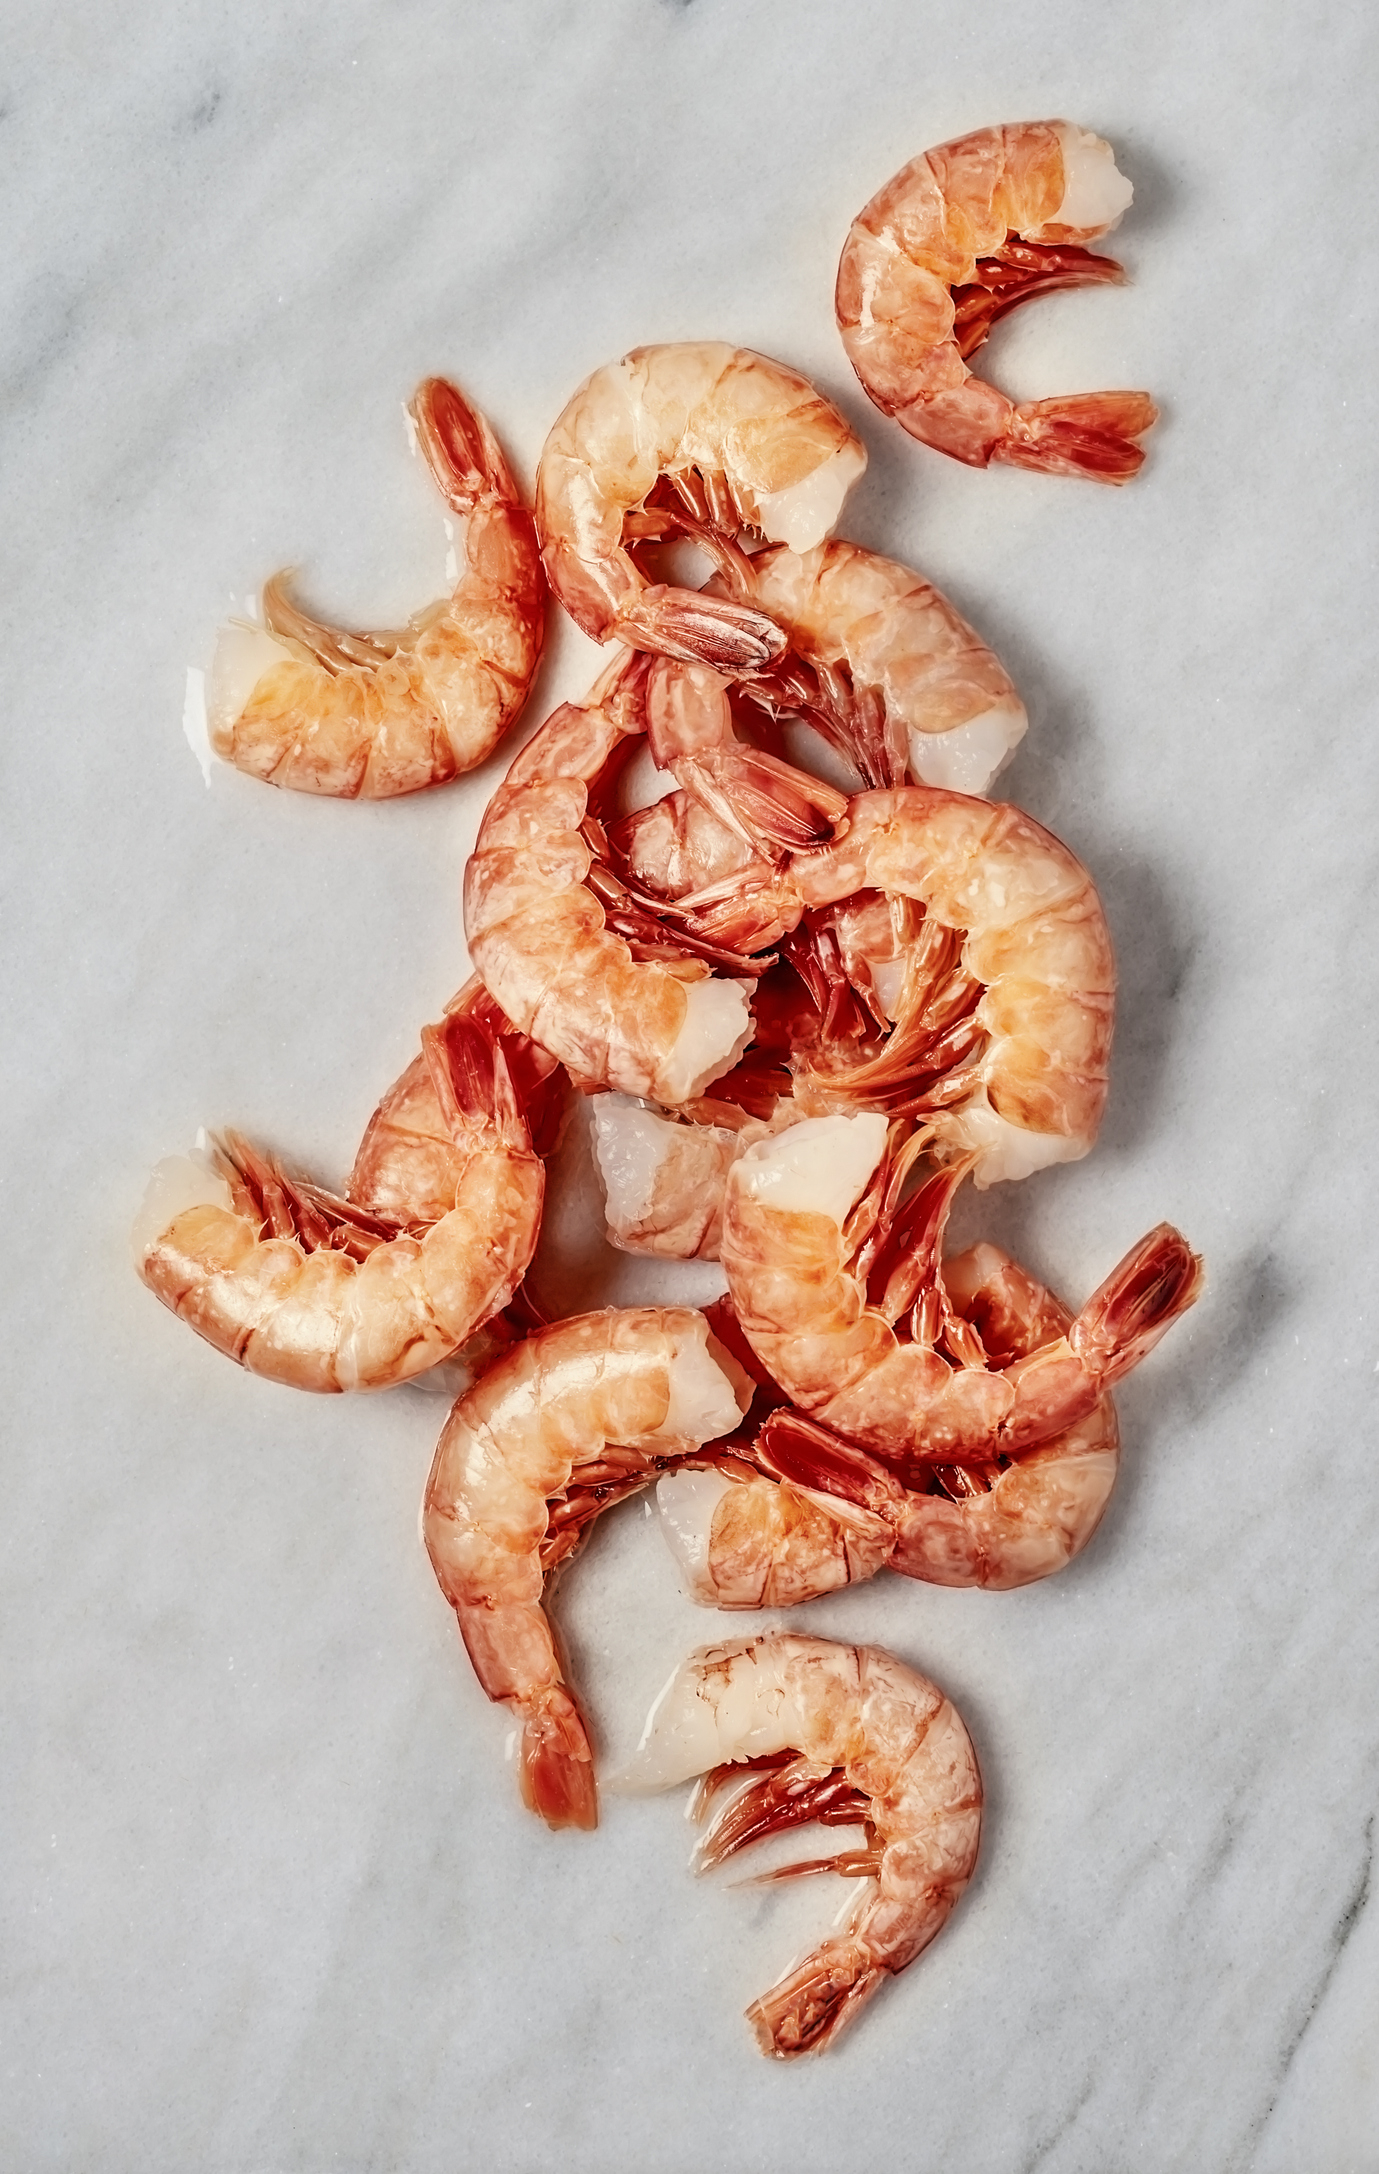 Cooked shrimp arranged on a flat surface, related to culinary aspects of dating